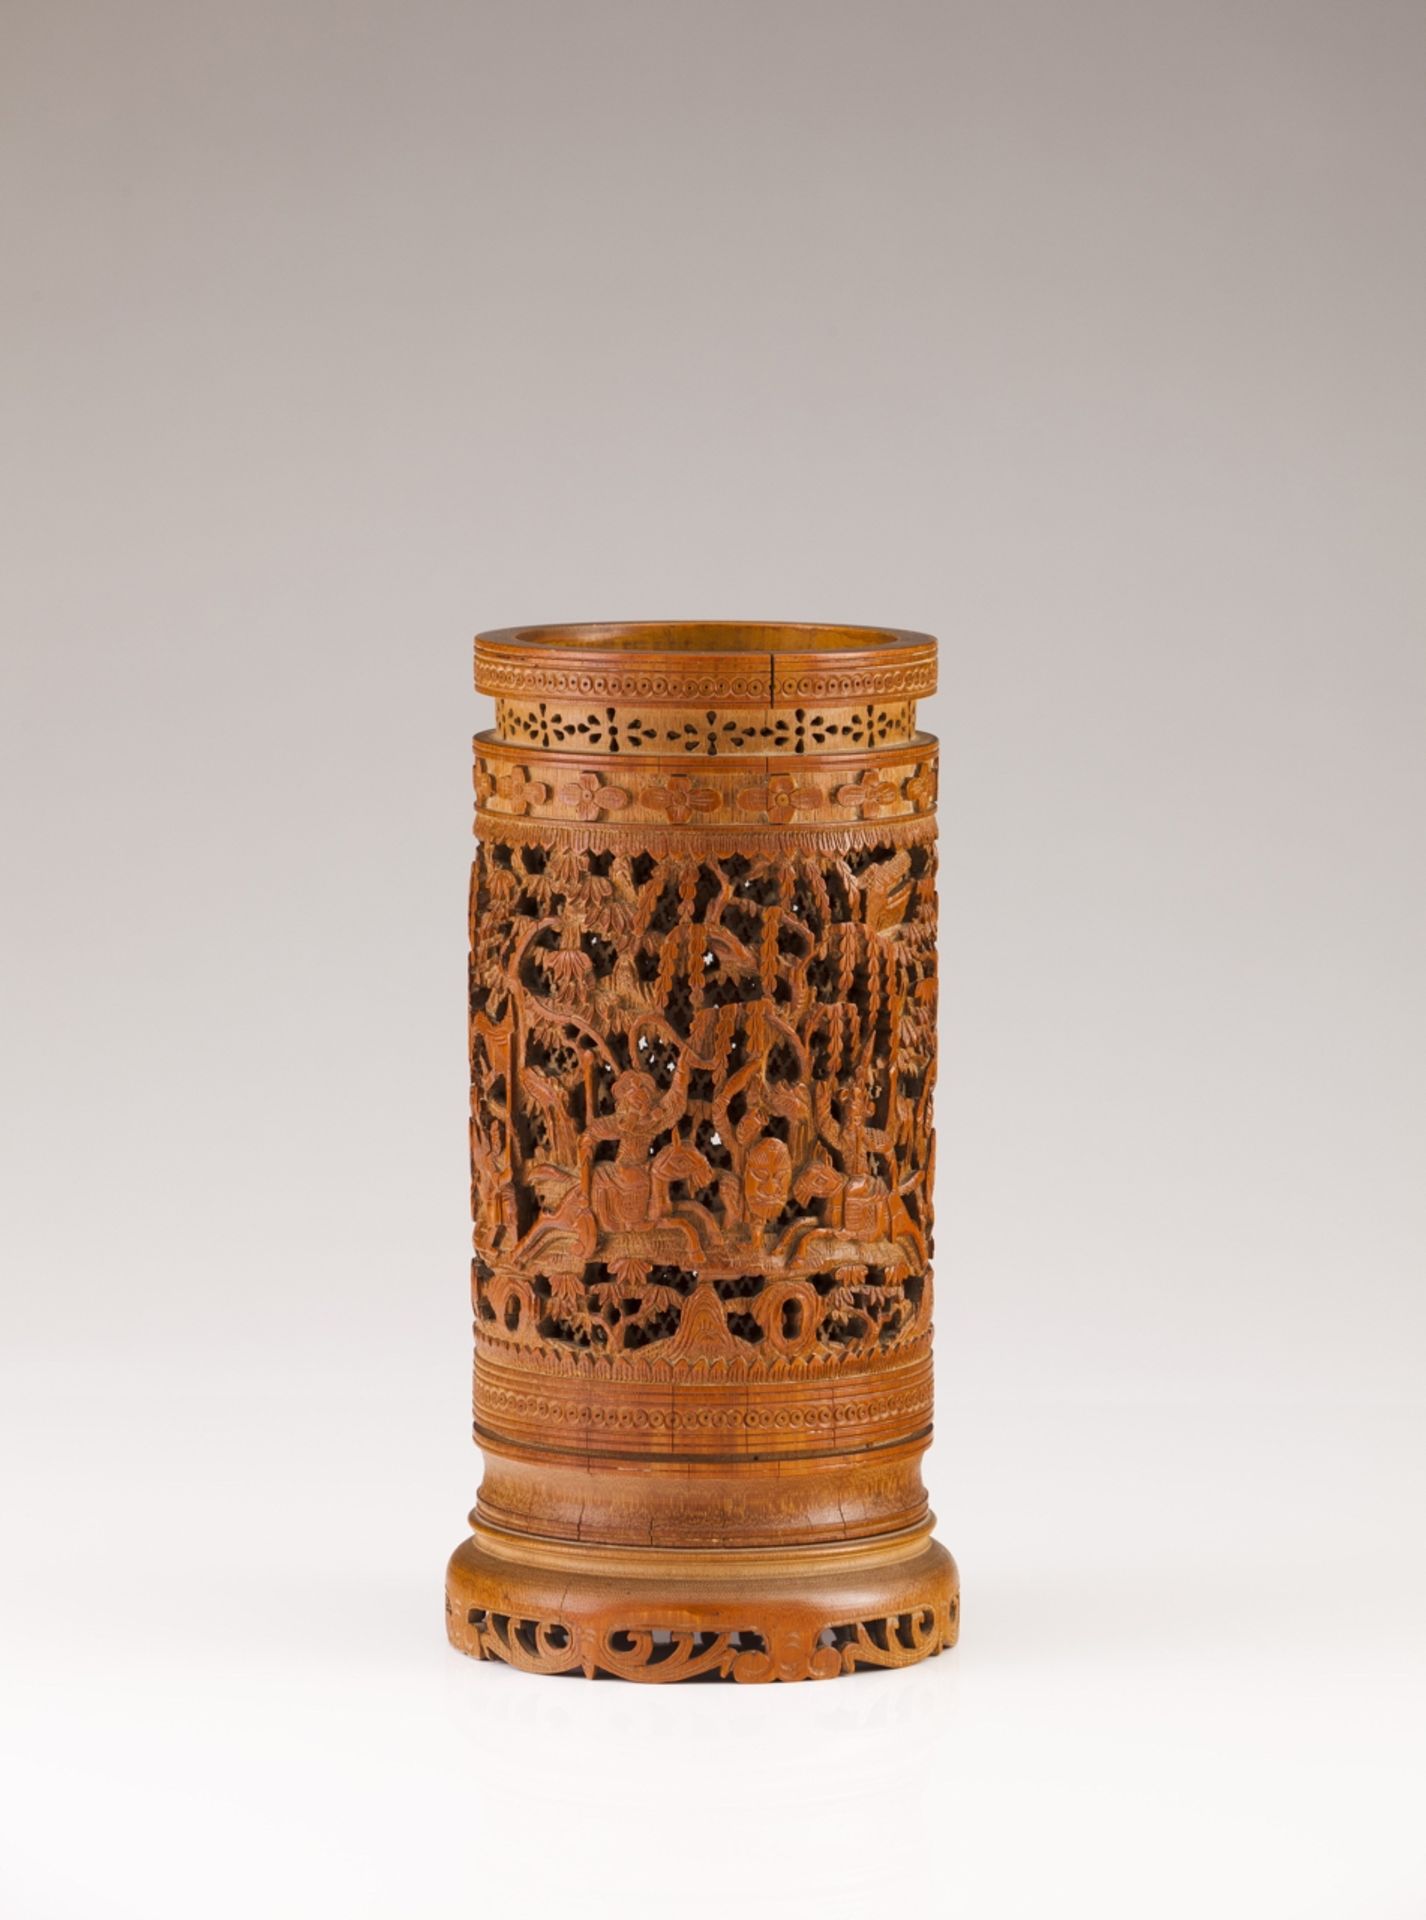 A 19th century Chinese bamboo jar  Carved bamboo depicting landscapes with warriors  China, 19th